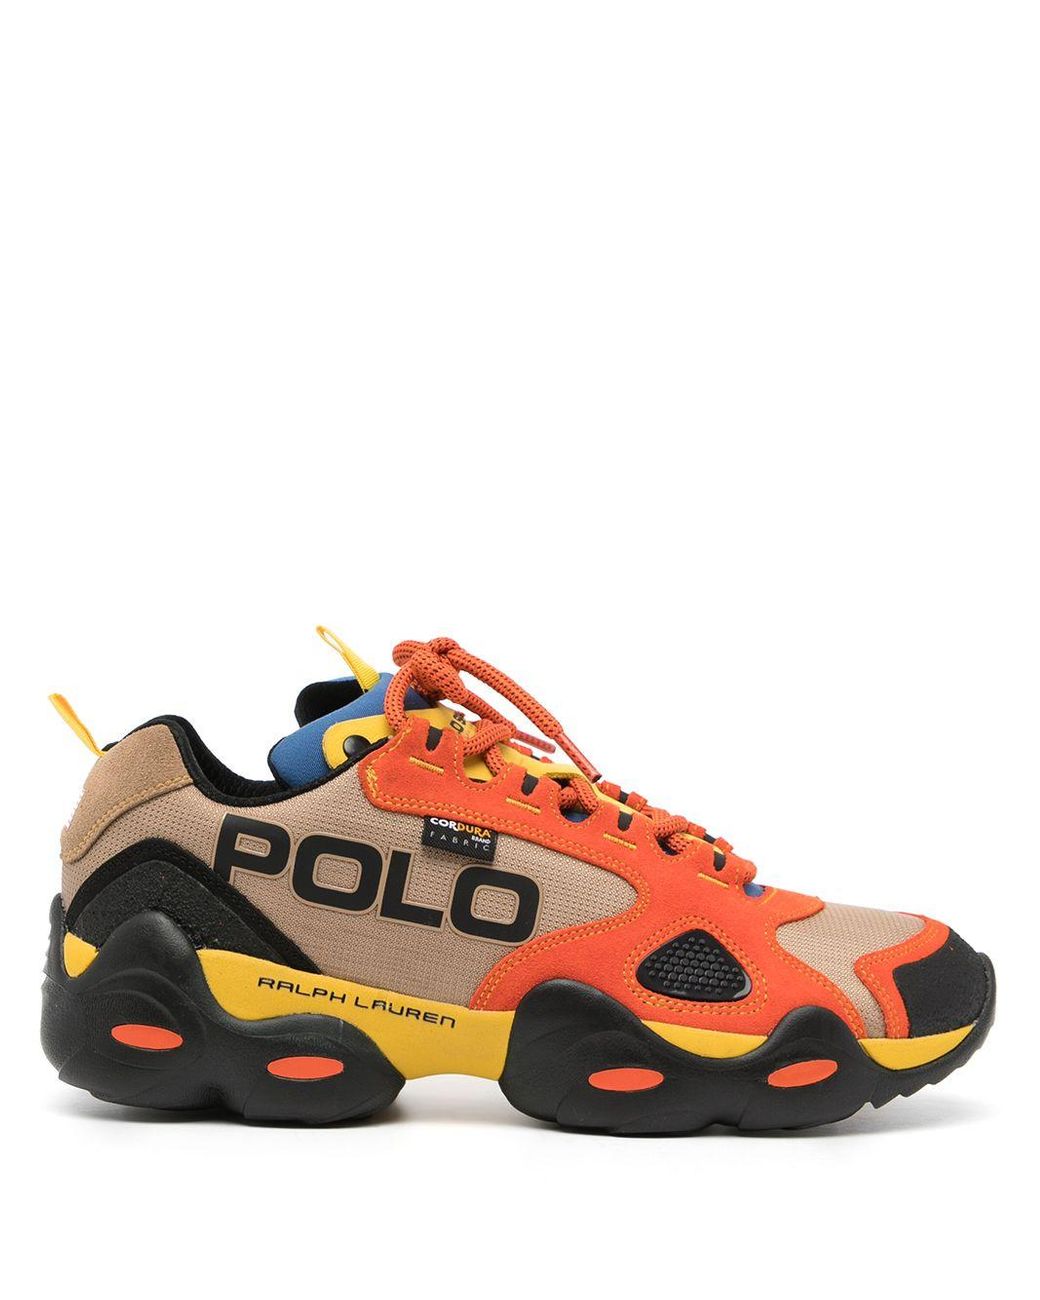 Polo Ralph Lauren Rlx Fast Trail Sneakers for Men | Lyst